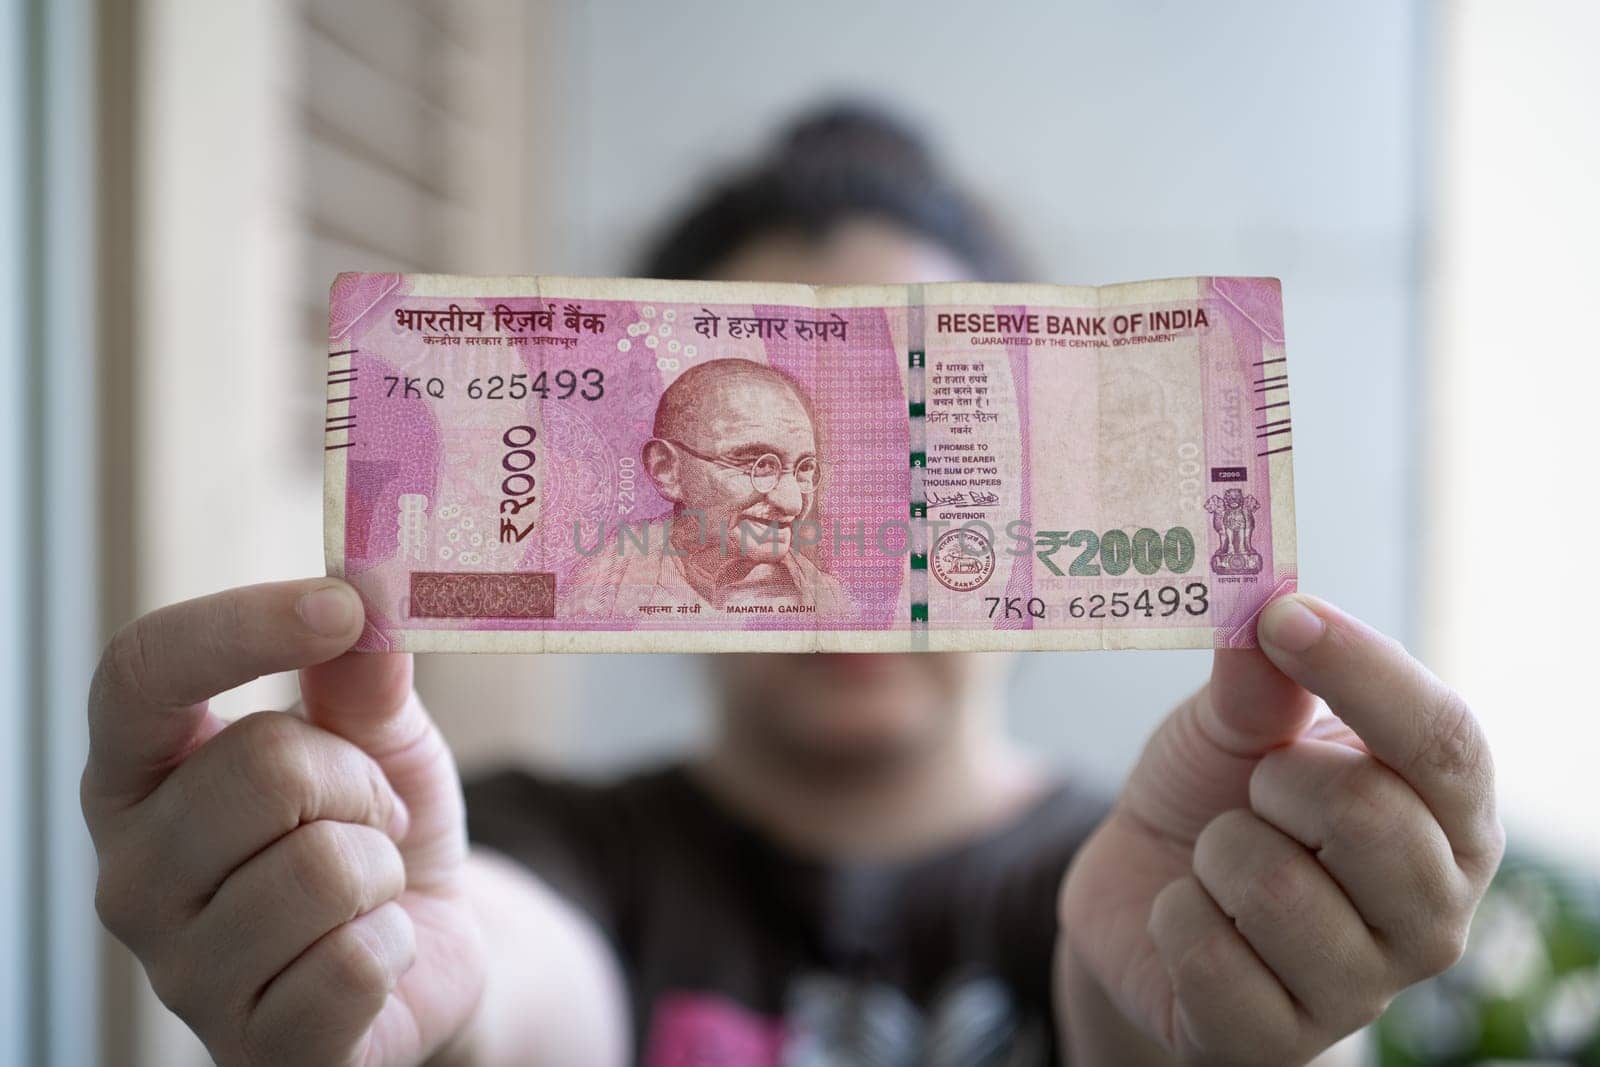 Woman holding out a Rs 2000 Indian bank note that has been removed from circulation through demonitization to reduce black money In India